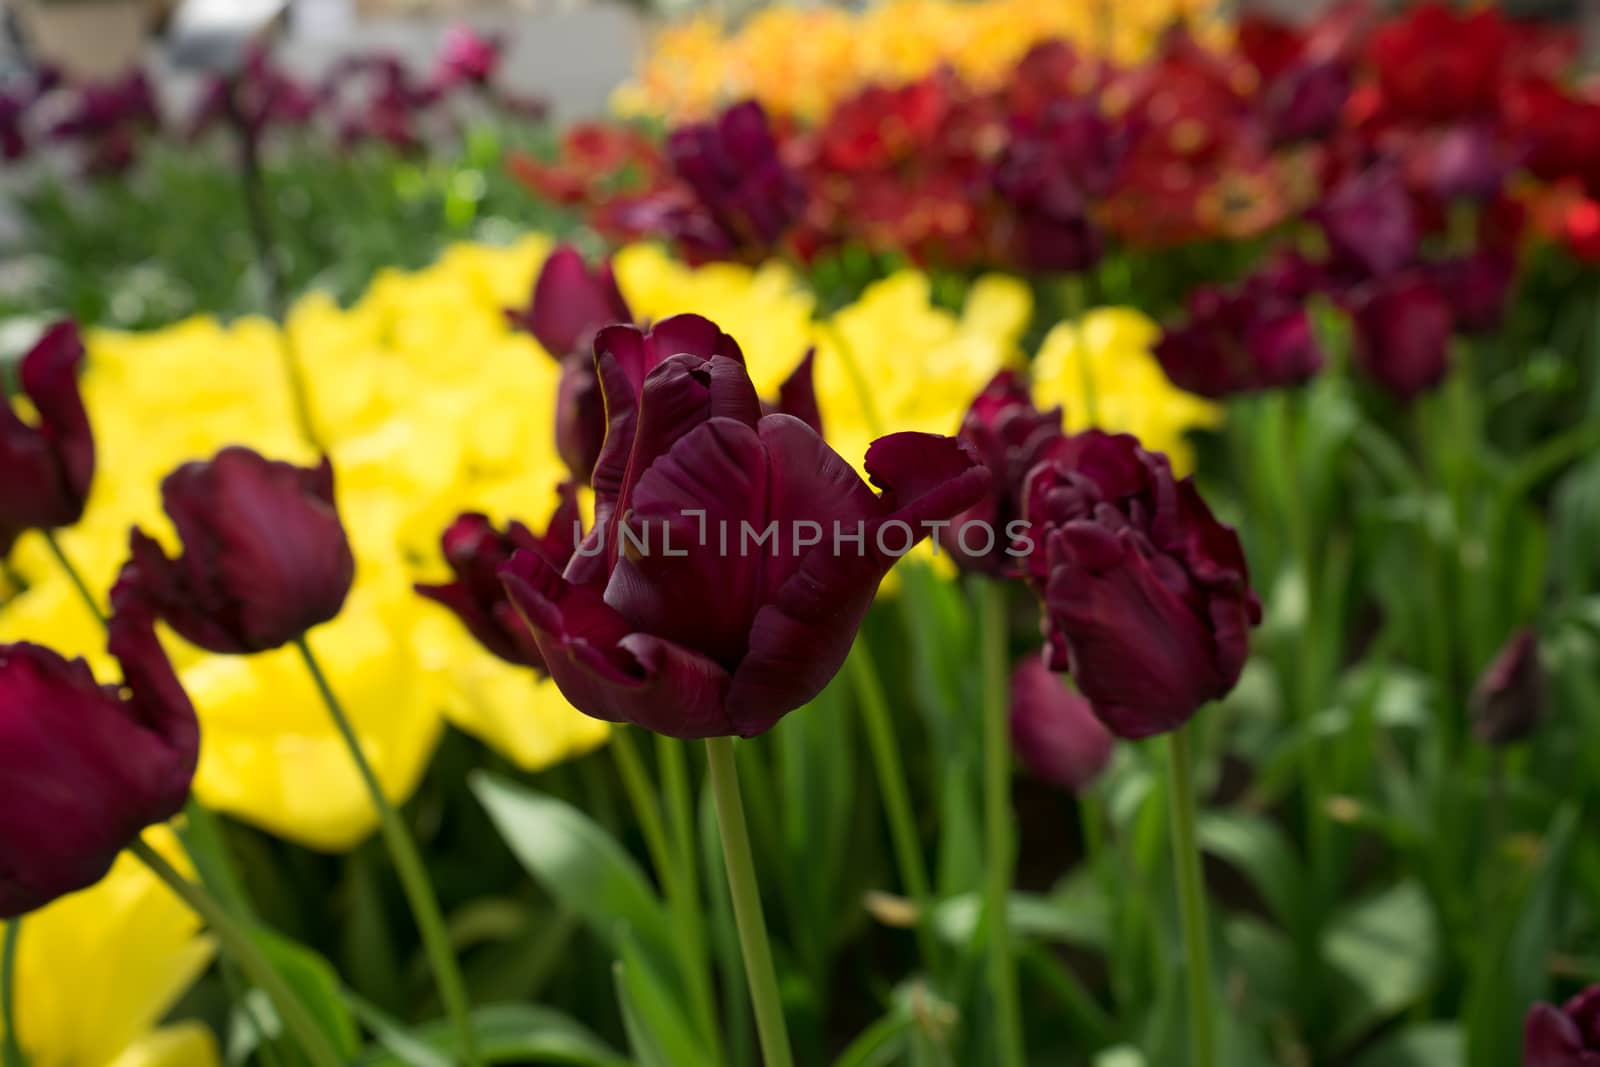 Black and yellow tulip flowers in a garden in Lisse, Netherlands by ramana16